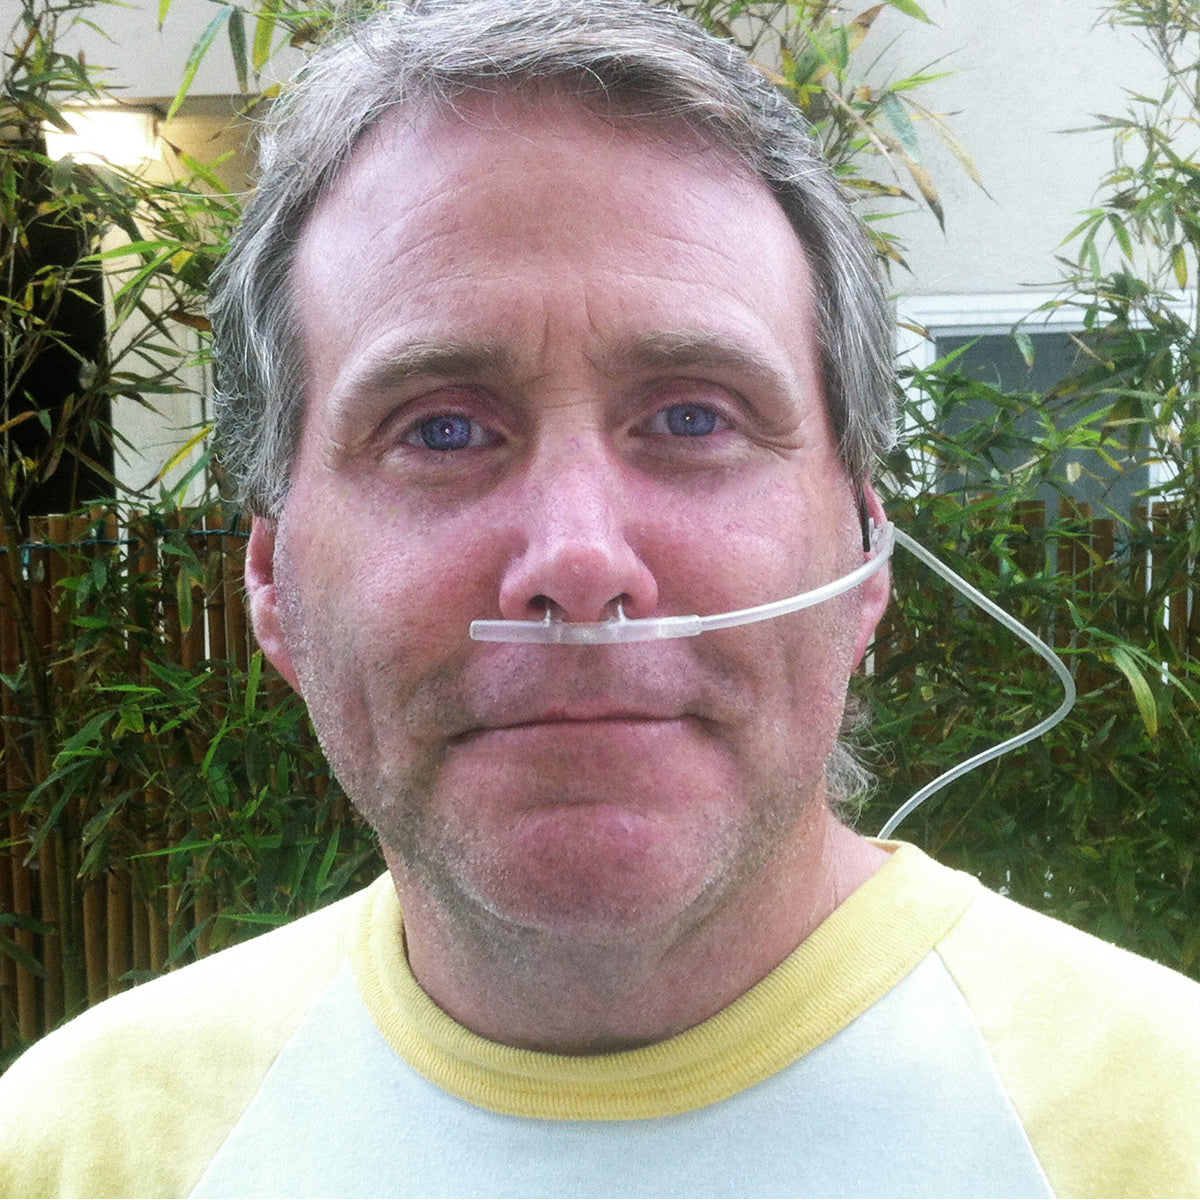 OxyBreather Single Sided Nasal Cannula with 4 Foot Oxygen Supply Tubing